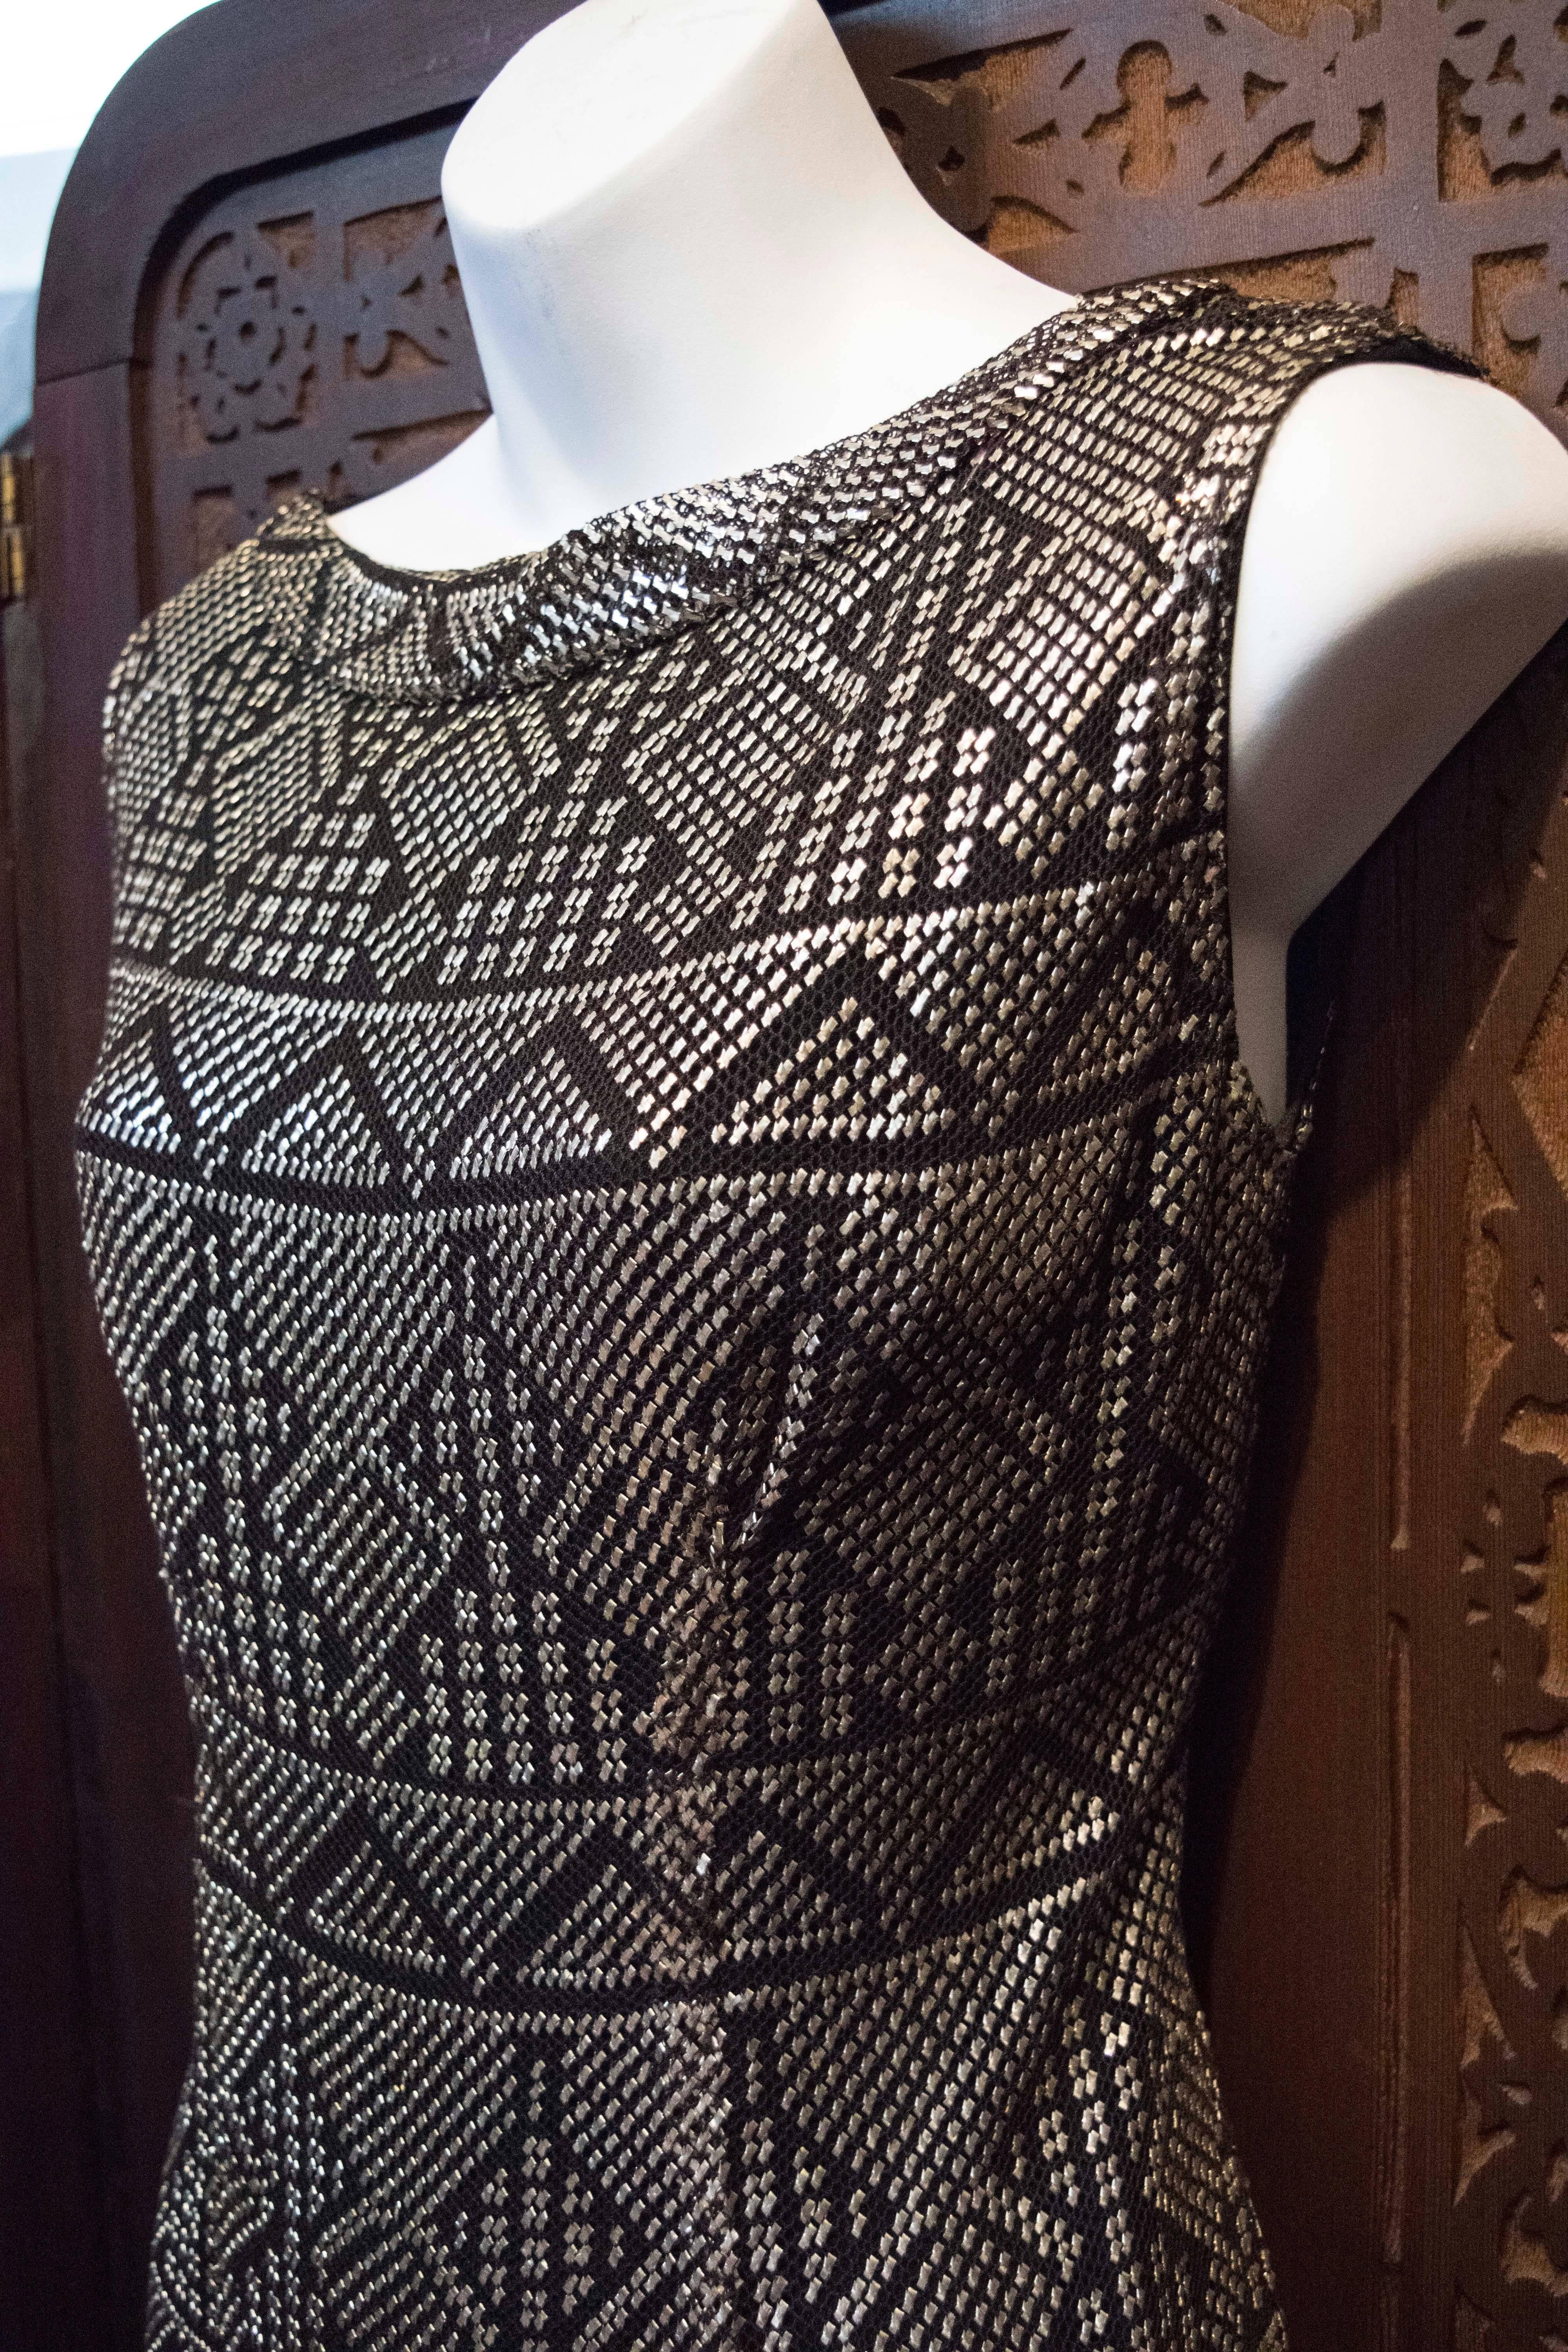 1960s Assuit Sterling Silver Dress.
A one of a kind hand made Assuit Sterling Silver Dress. A truly stunning piece! 